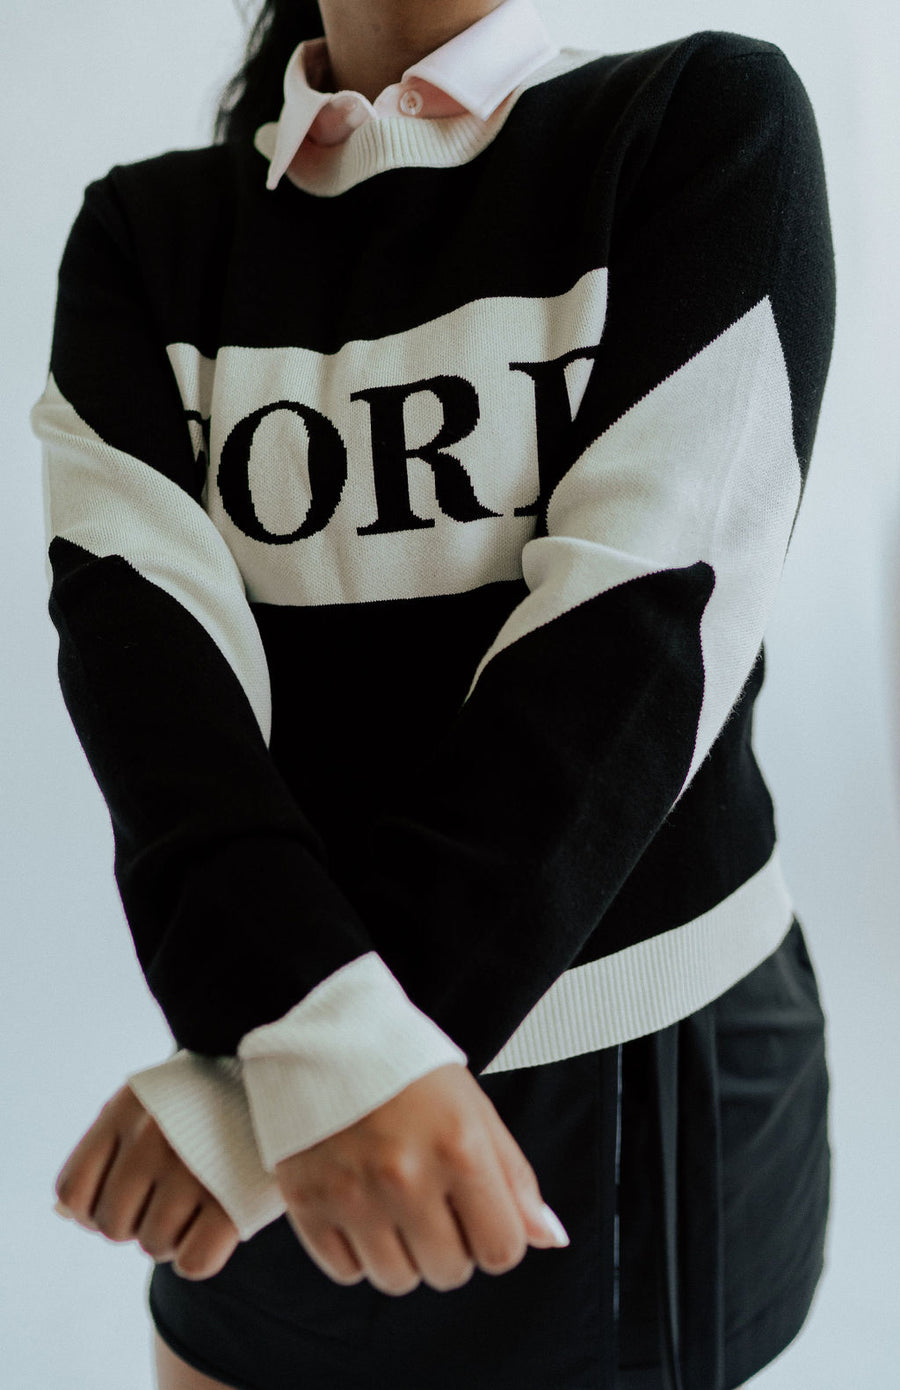 Fore Sweater Black